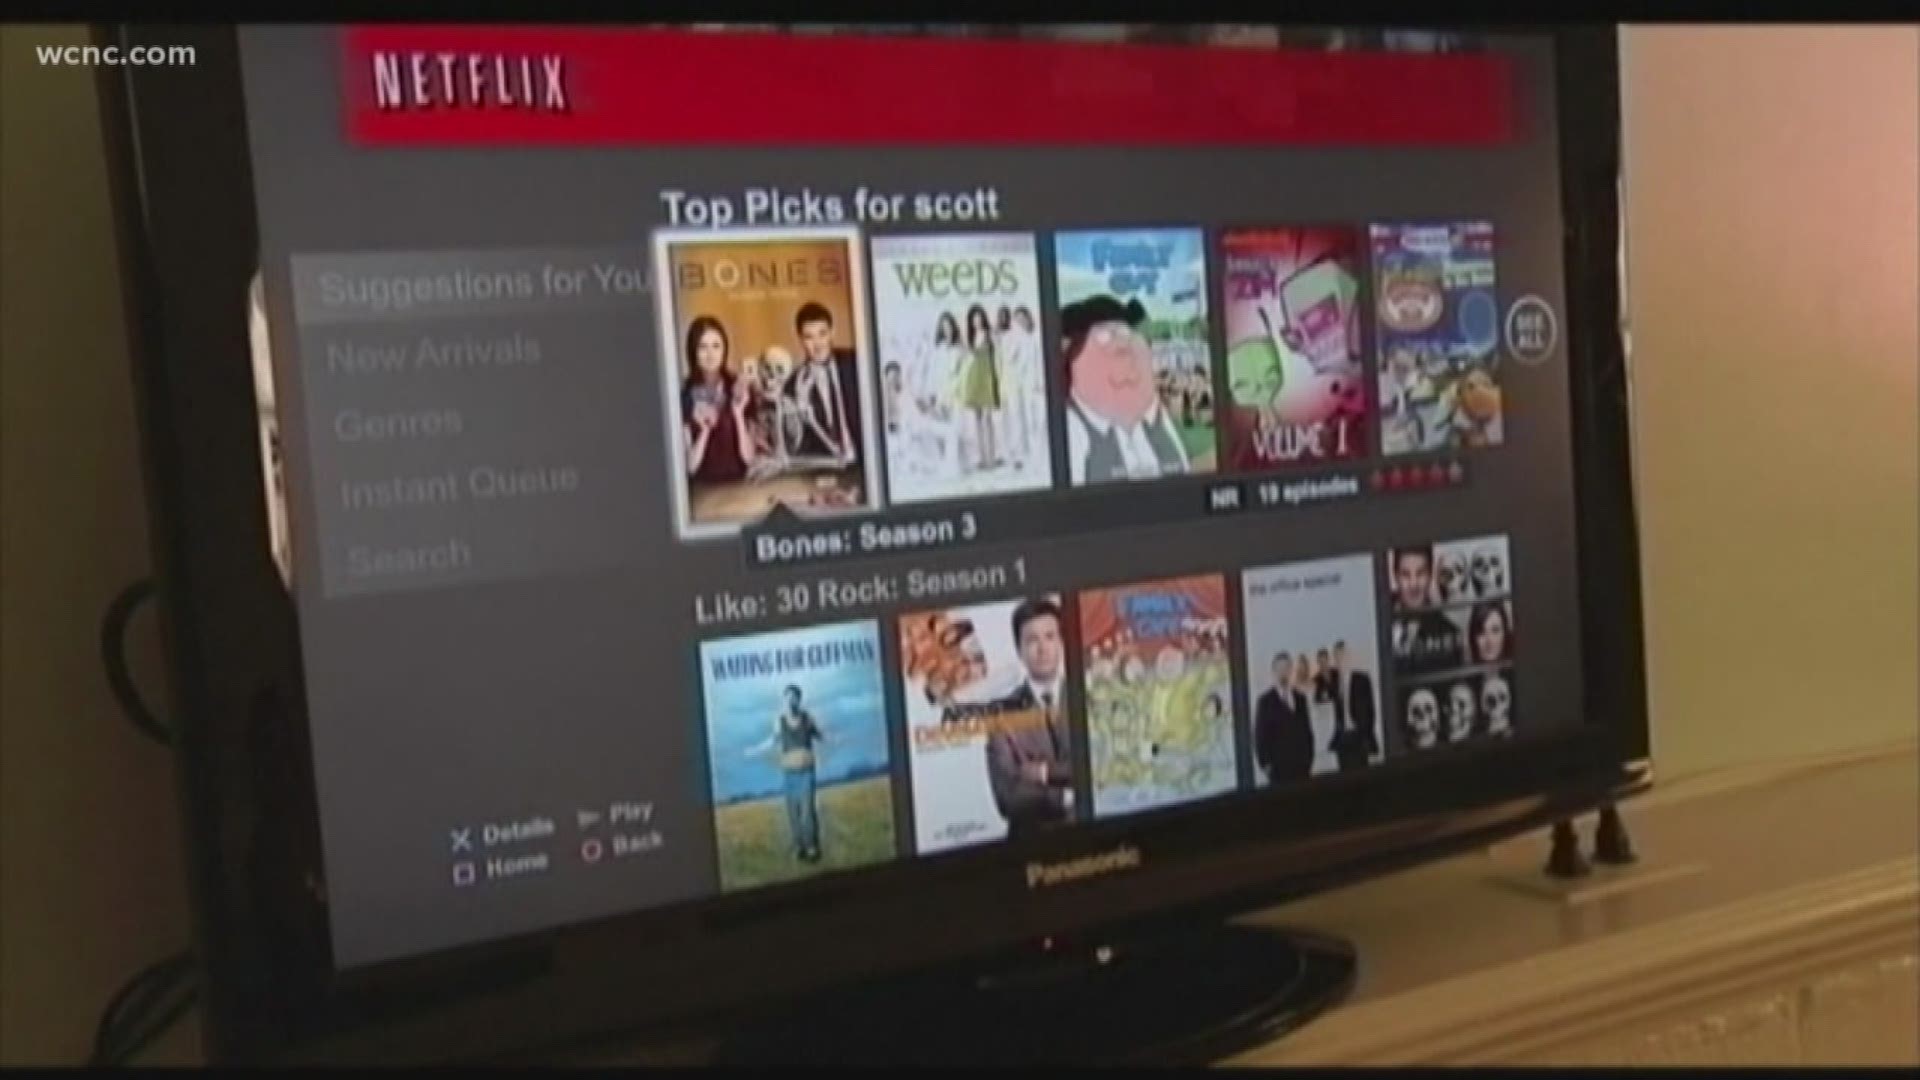 Say goodbye for desperately looking for something to watch on Netflix. The streaming service is testing out a new shuffle feature that would randomly pick a show for you based on movies and shows you watch.